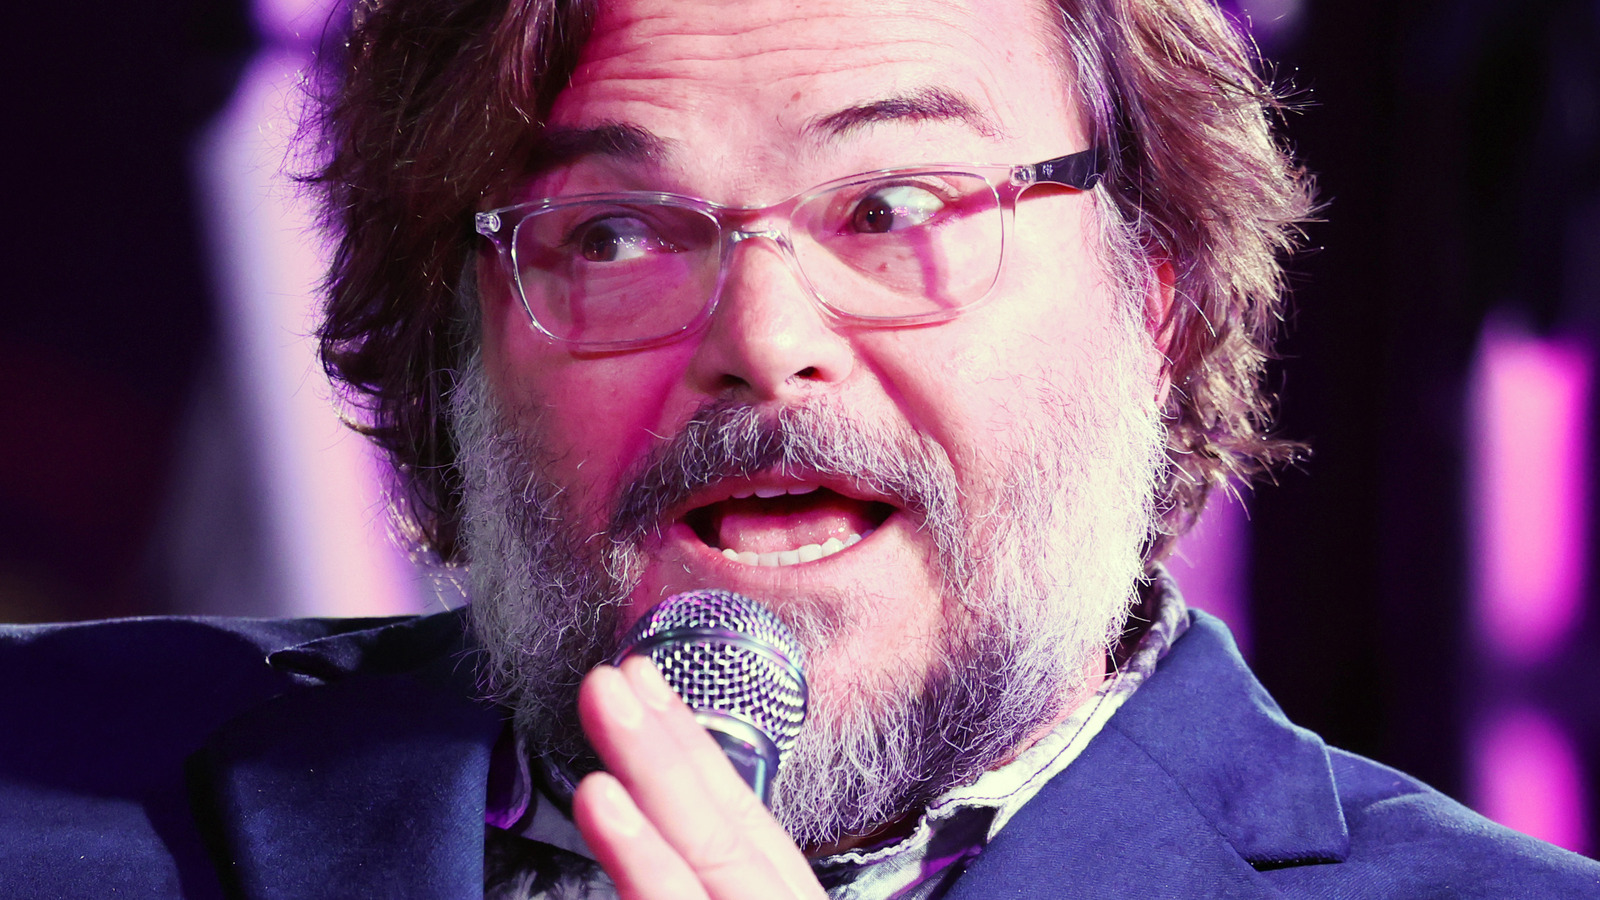 Jack Black Went Viral Performing A 'School Of Rock' Song